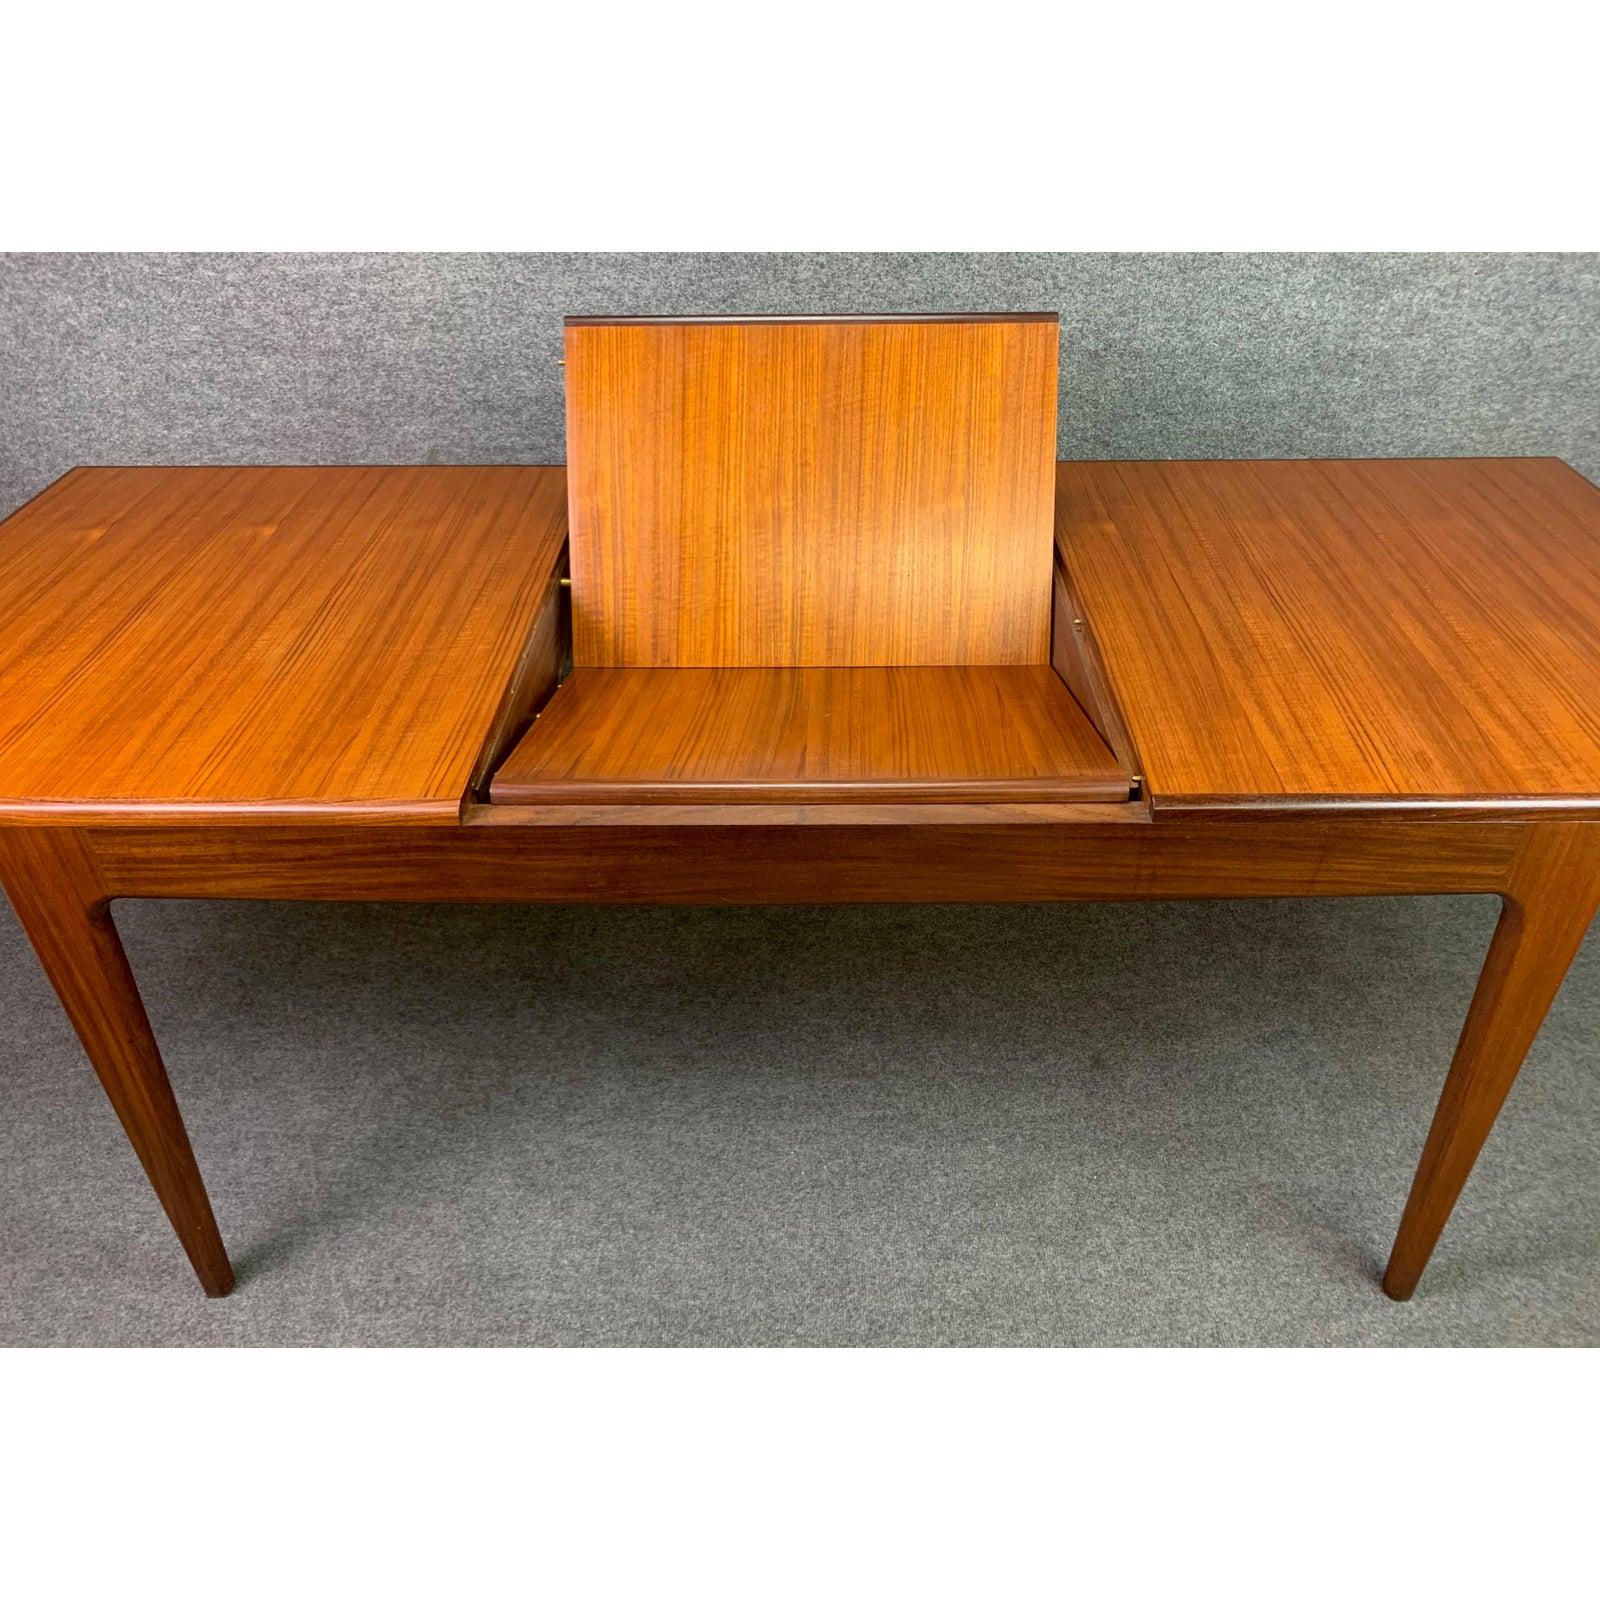 Mid-Century Modern Vintage British Midcentury Teak Dining Table by John Herbert for A. Younger